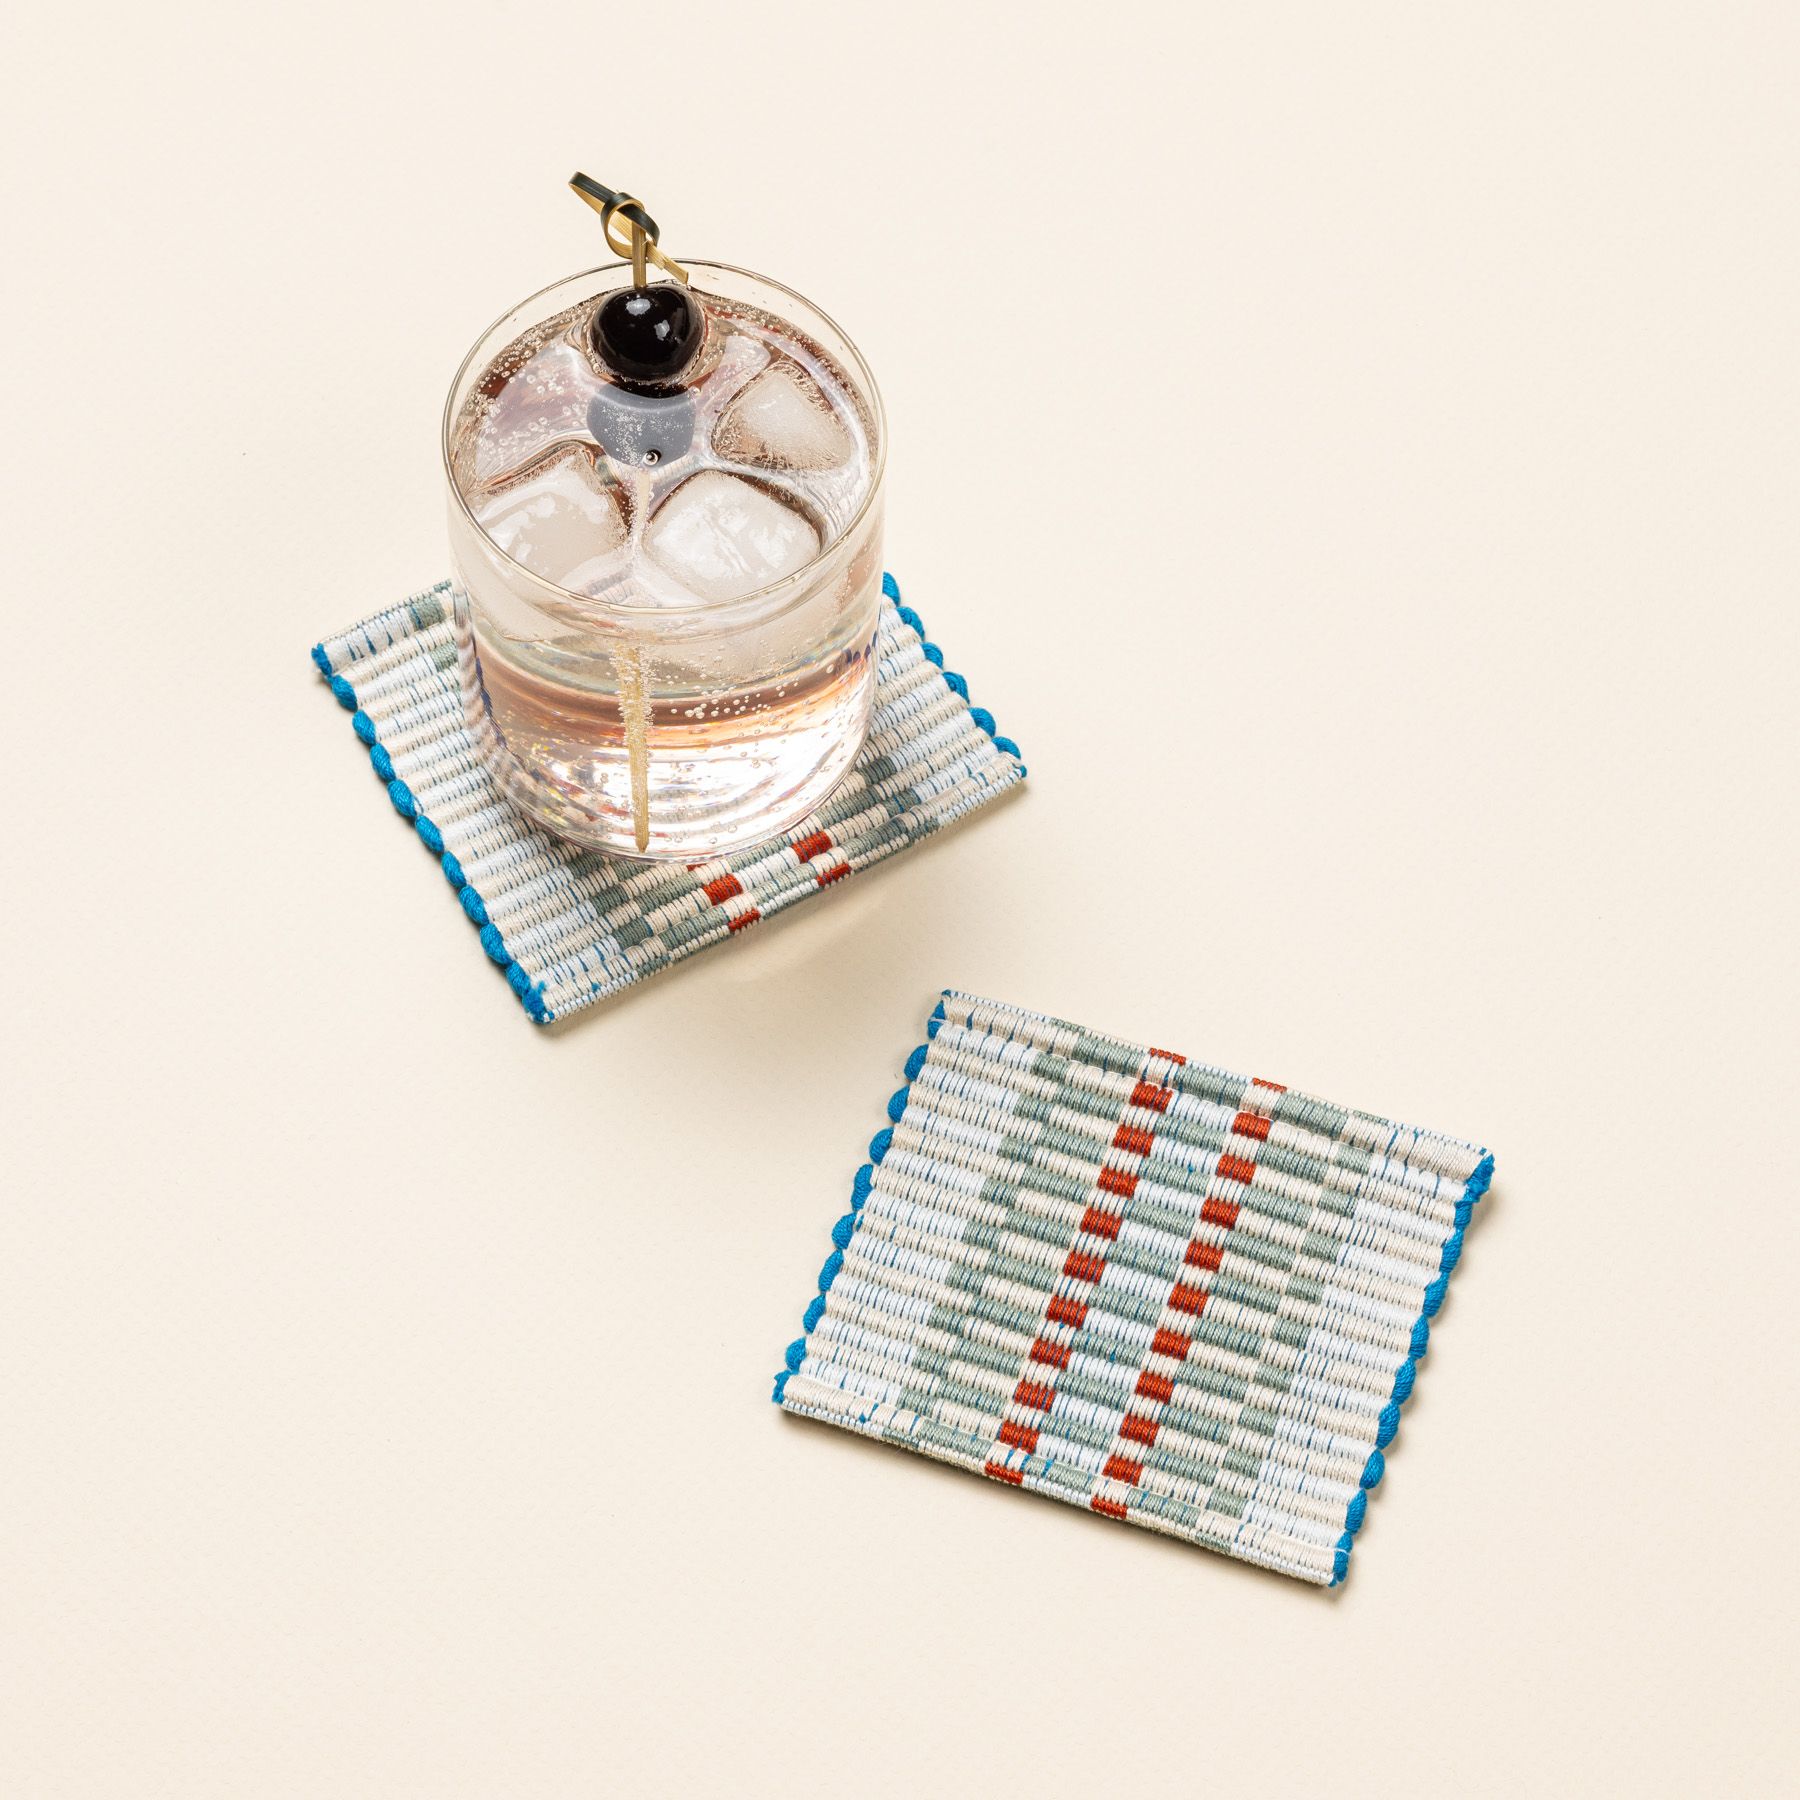 A cocktail sits on 1 of 2 square coasters that are hand woven in a striped rectangular grid design in sage, orange, and blue colors